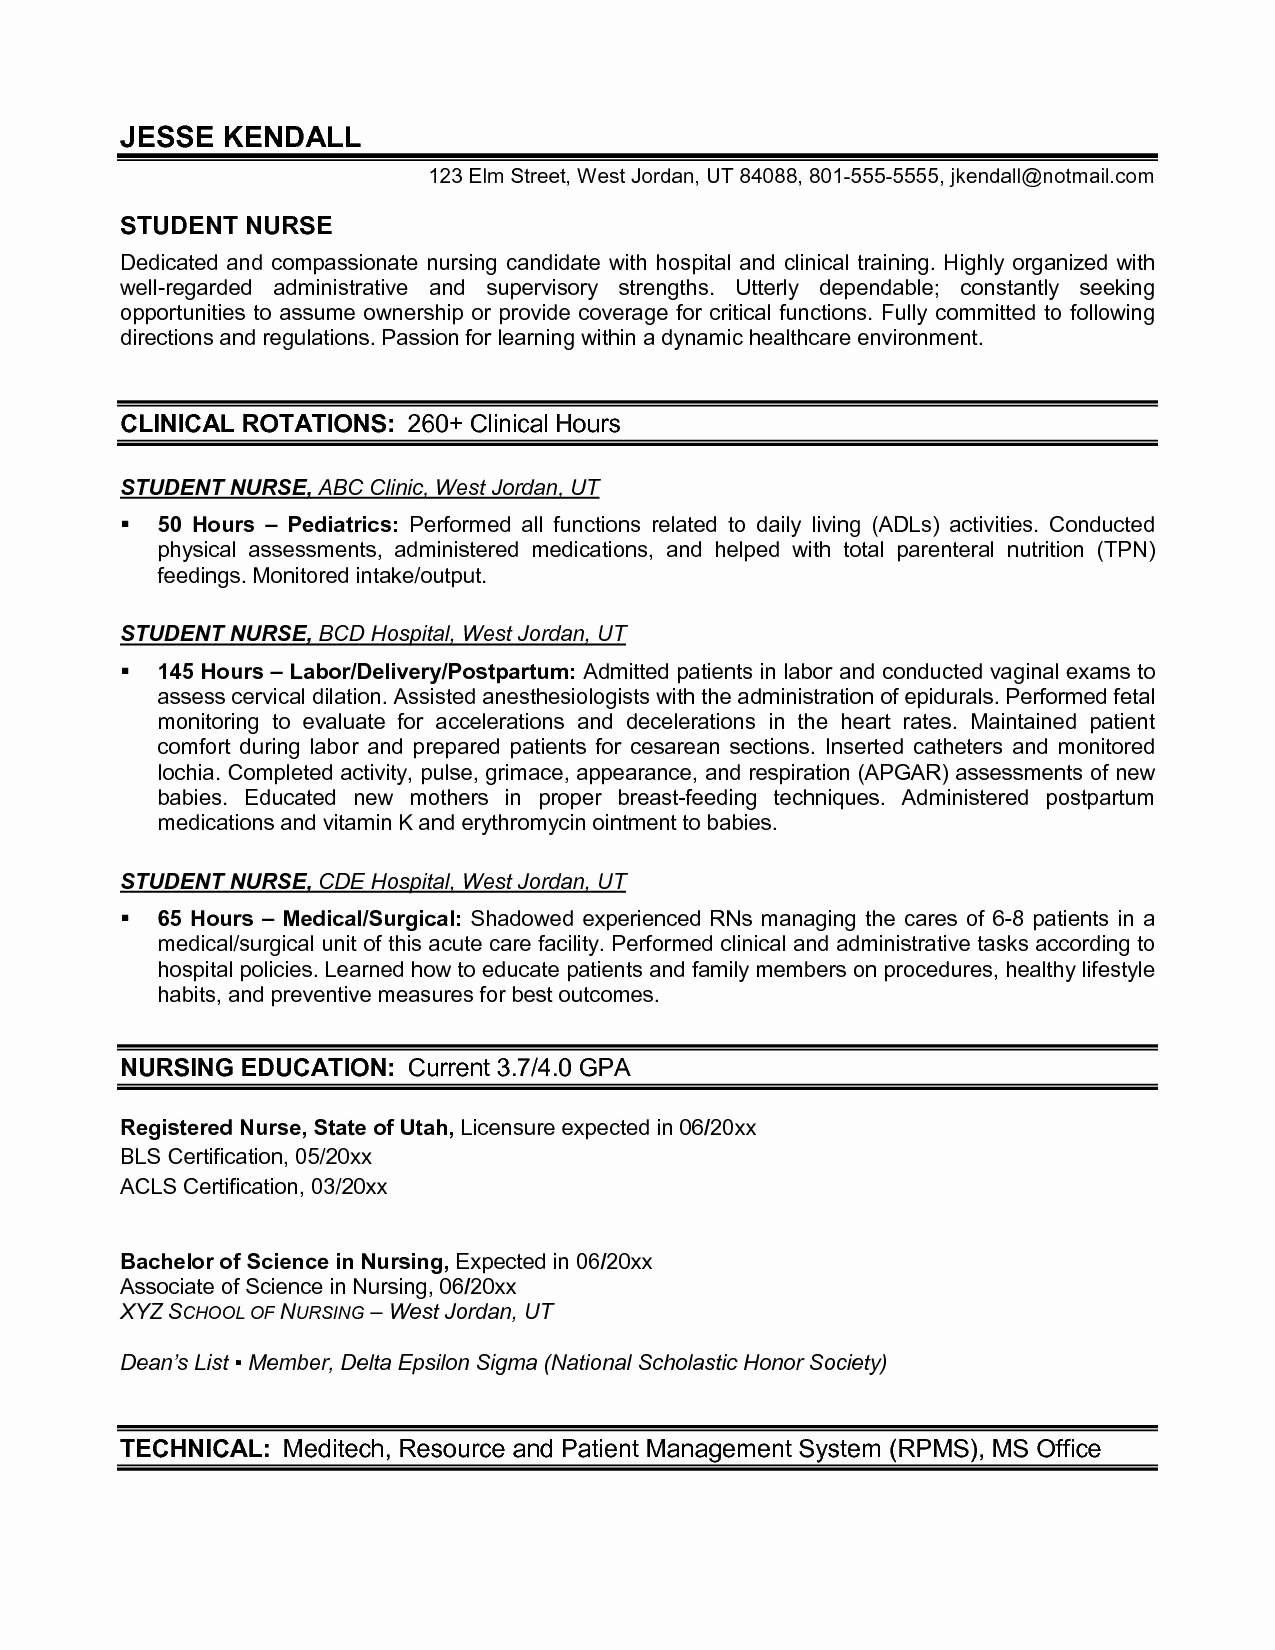 Sample Resume for Newly Graduated Student Sample Resume for Graduate Nursing Schol